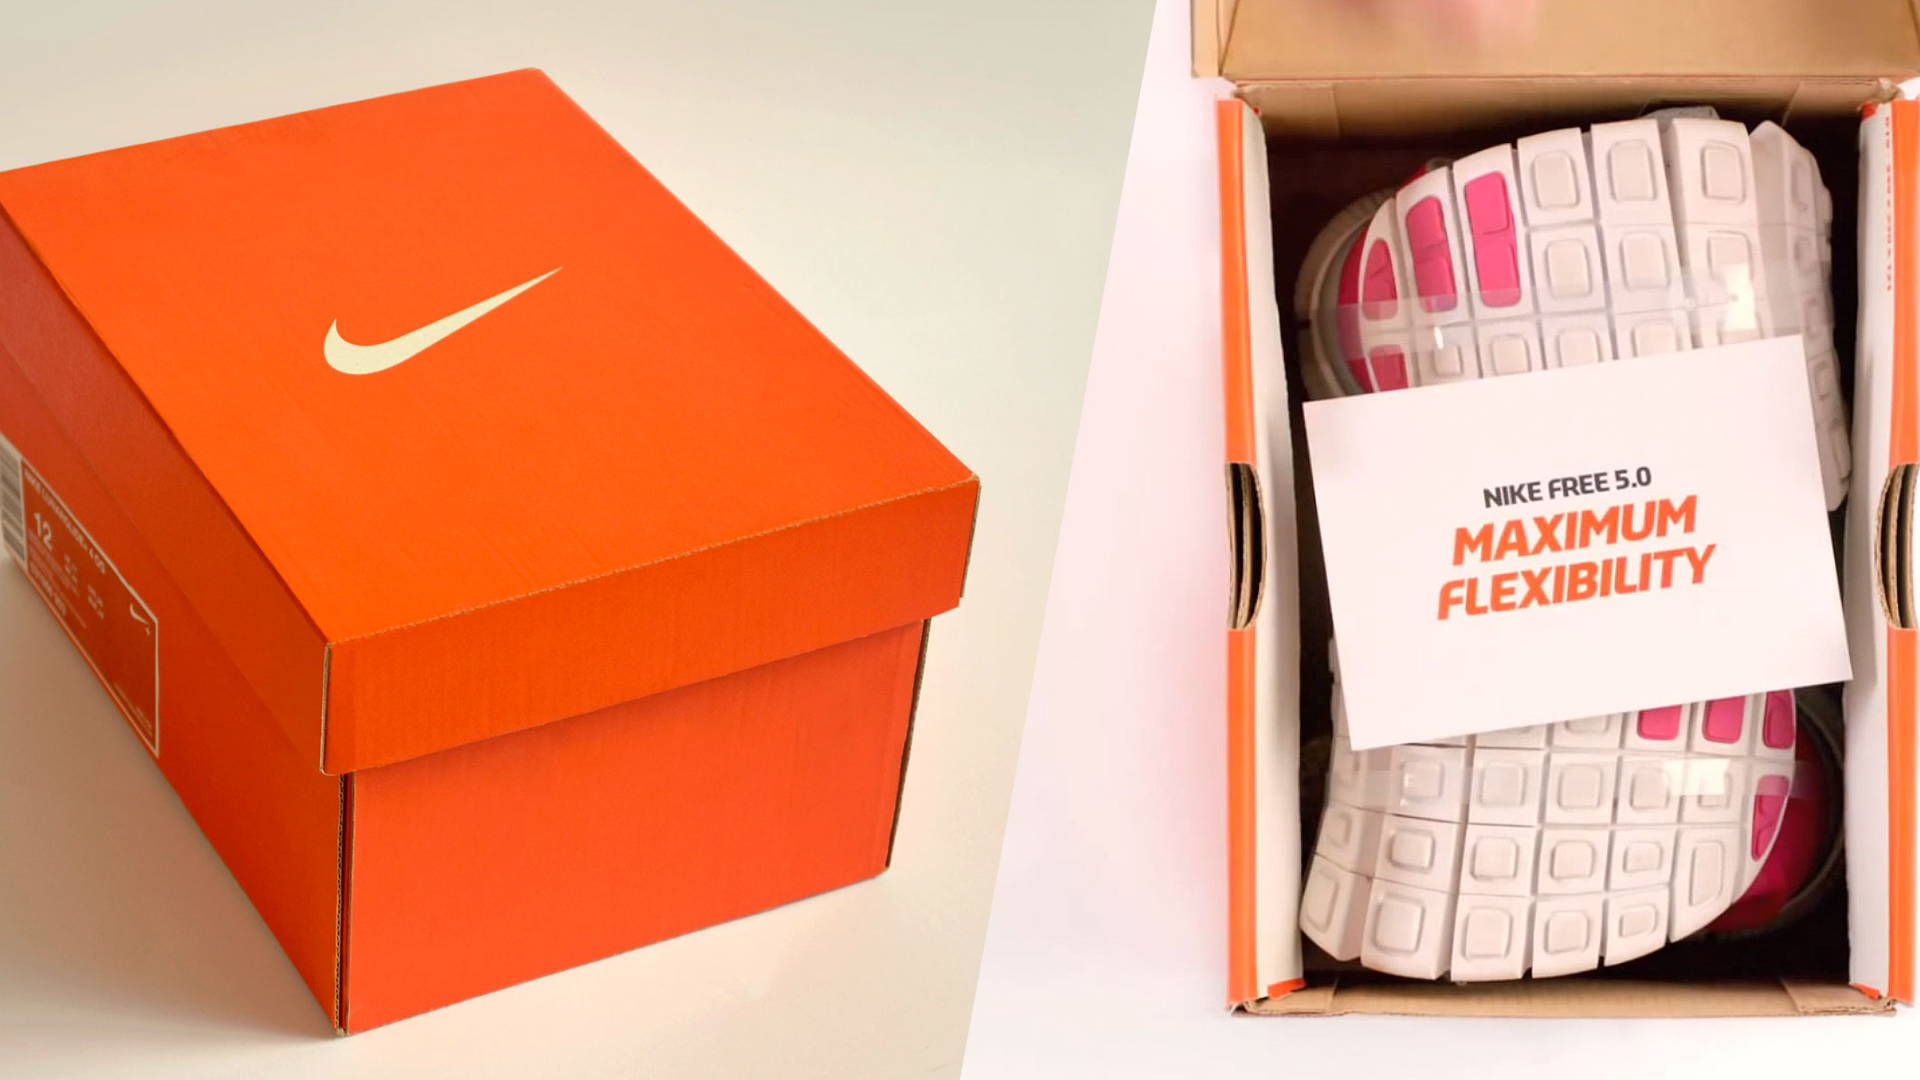 Featured image for Nike Free Box: A Shoebox 1/3 the Size of the Original